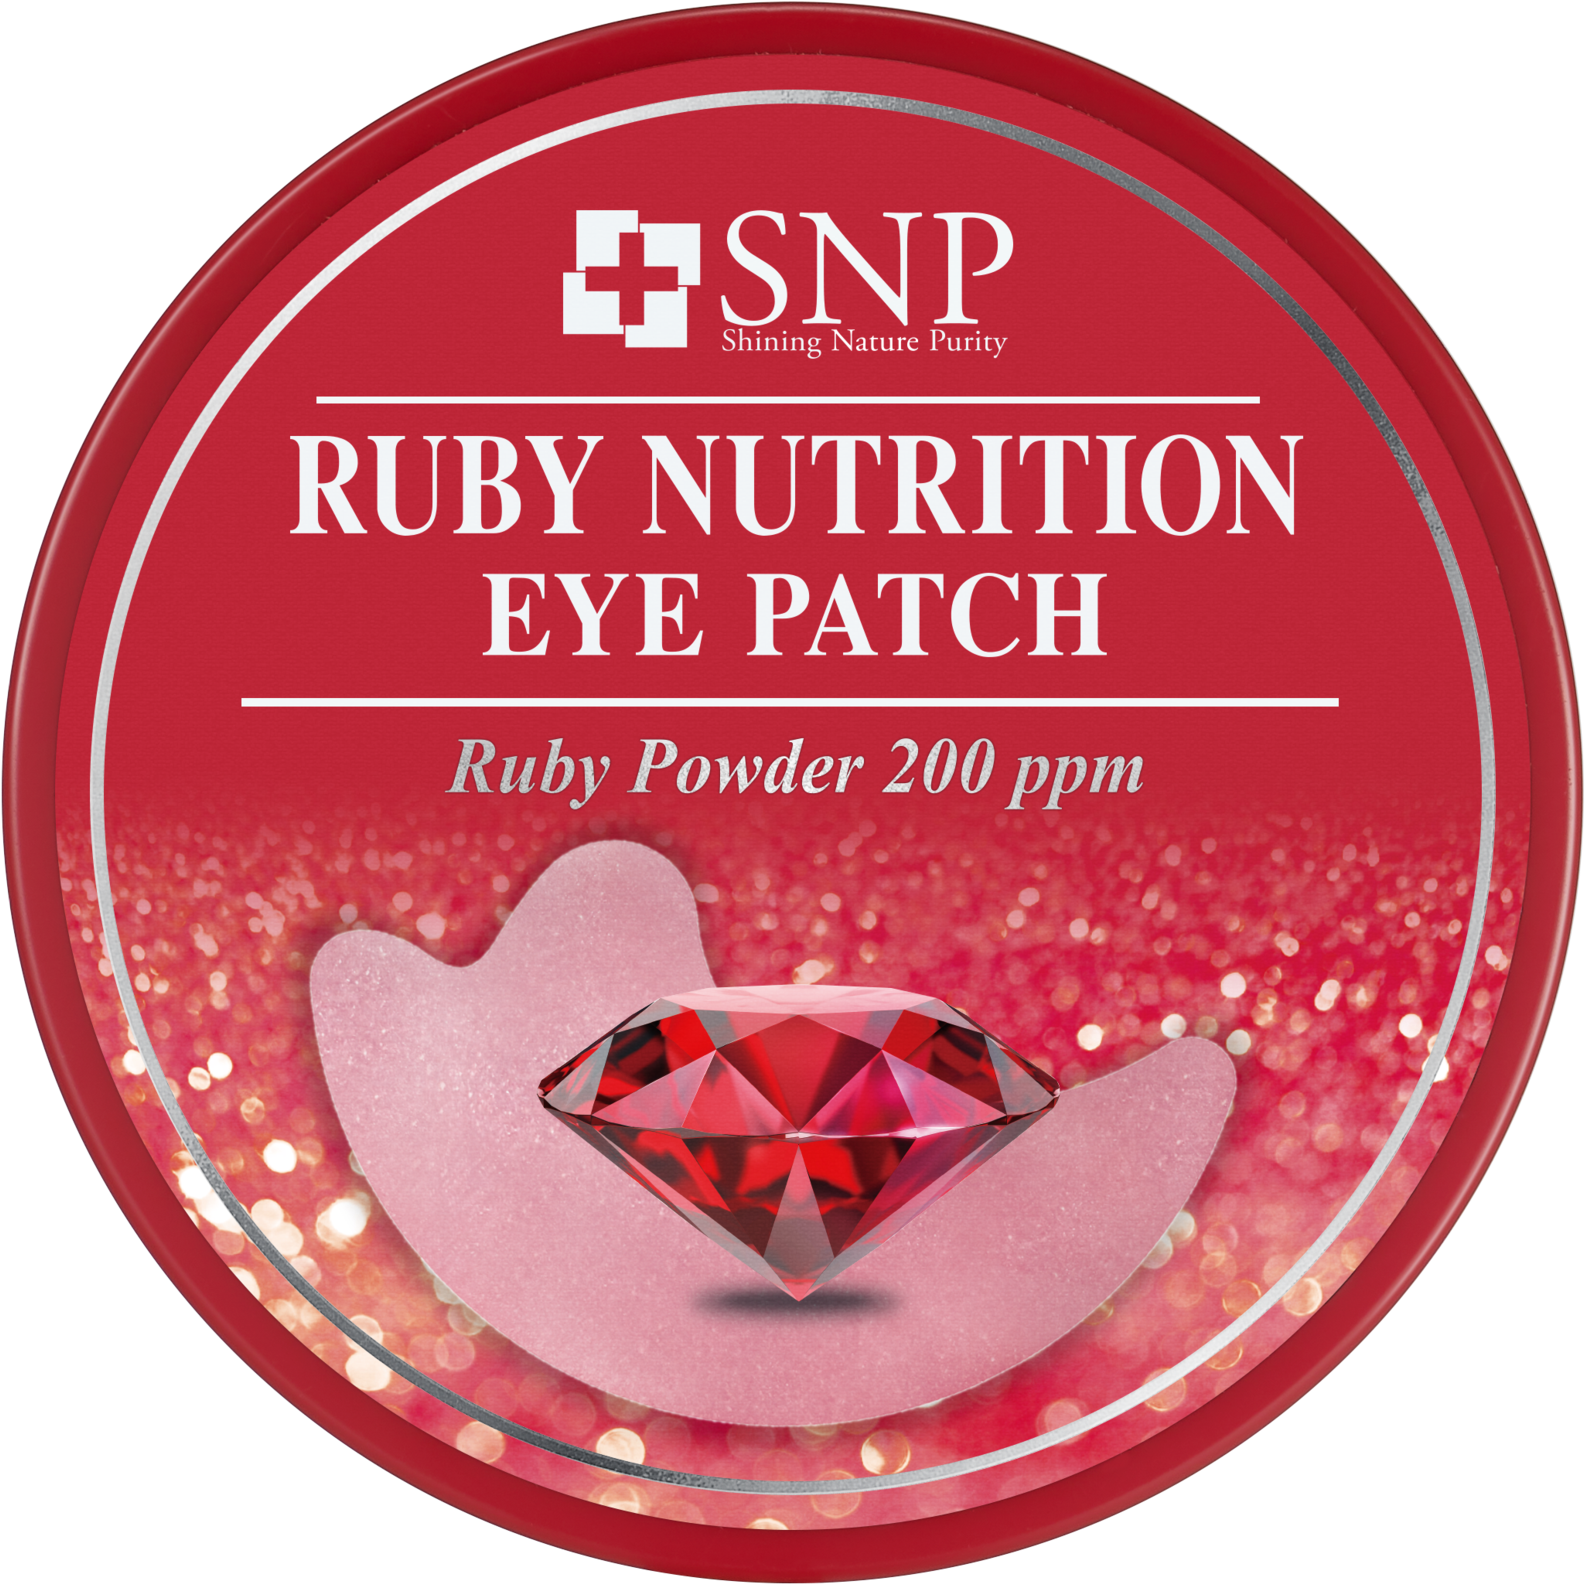 Load Image Into Gallery Viewer, Ruby Firming Eye Patch - Circle (1985x2048), Png Download